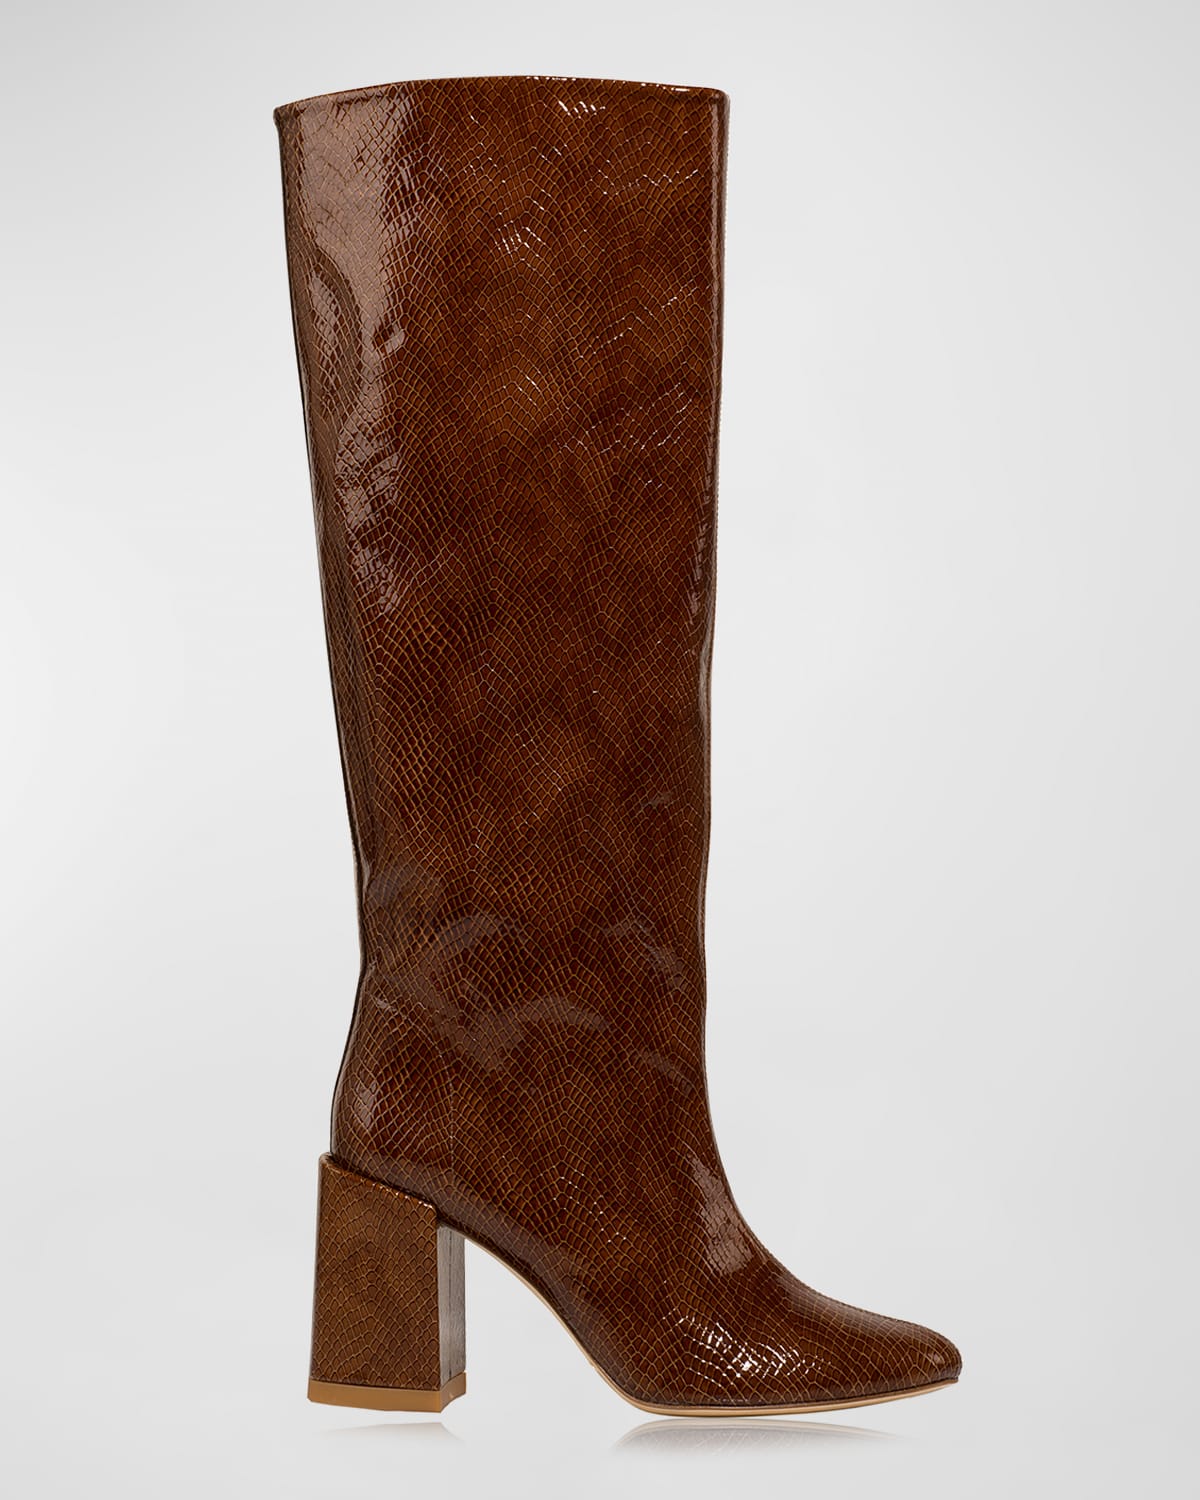 Chelsea Paris The Bo Patent Snake-Embossed Knee Boots